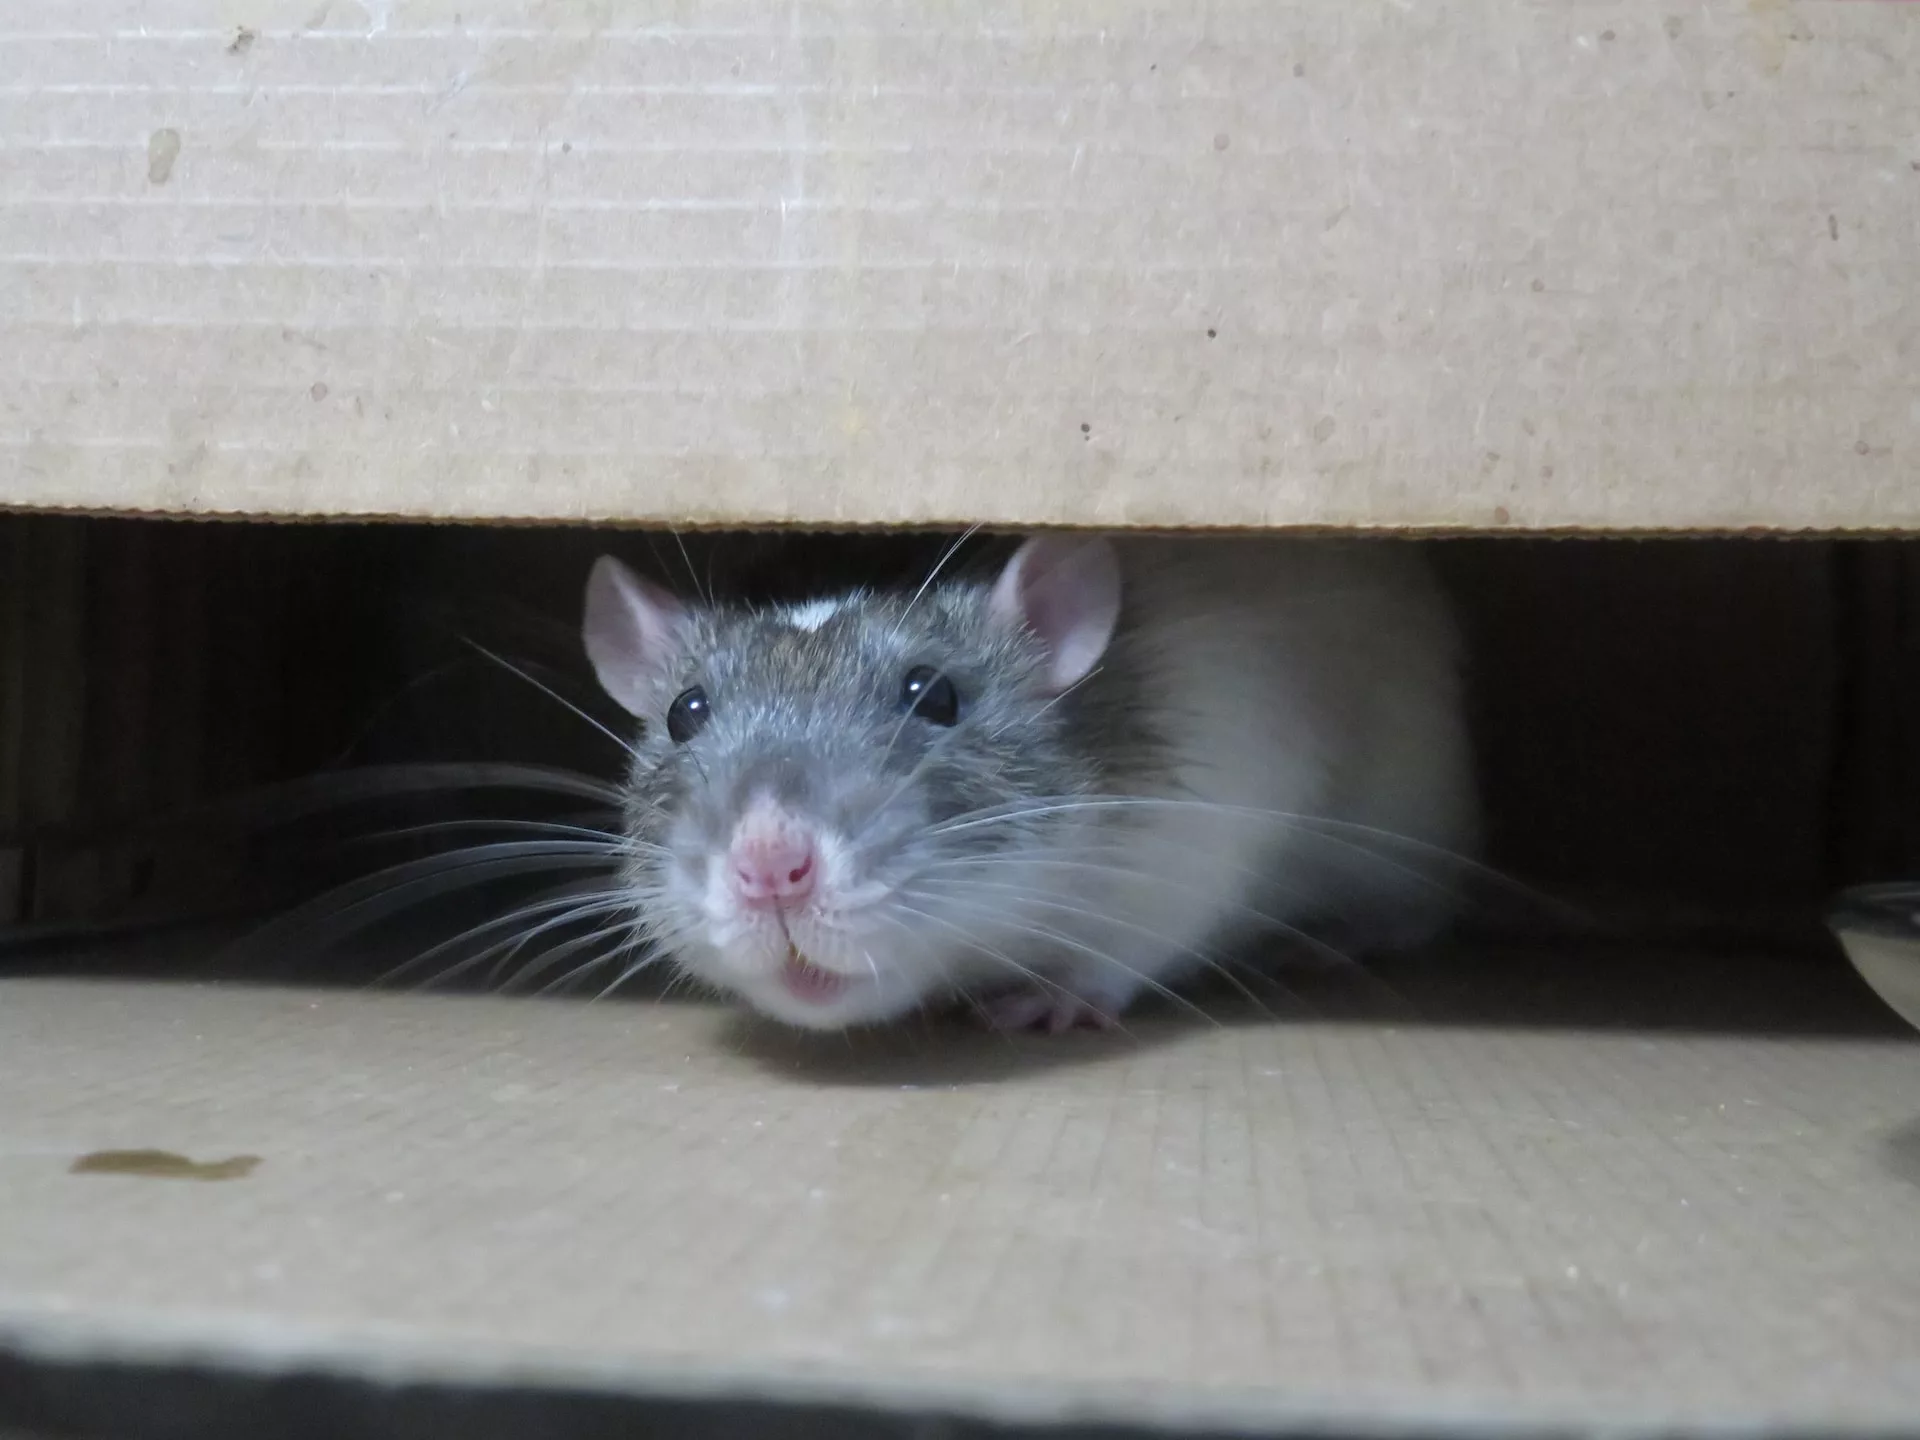 A rat peeking out from under a cardboard box.